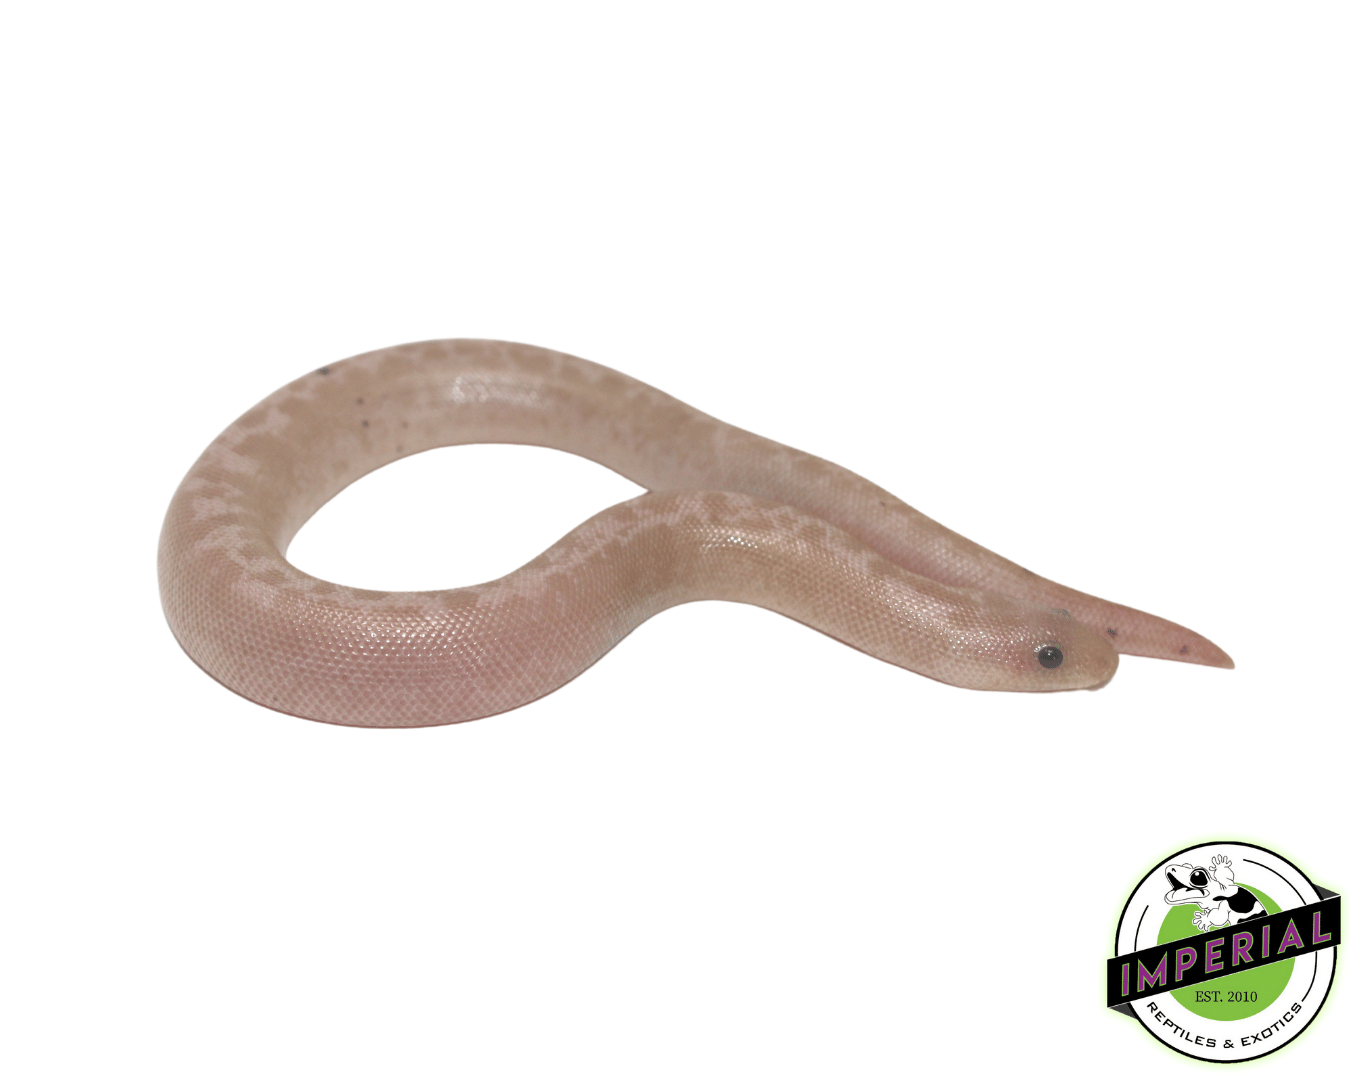 striped snow kenyan sand boa for sale, buy reptiles online